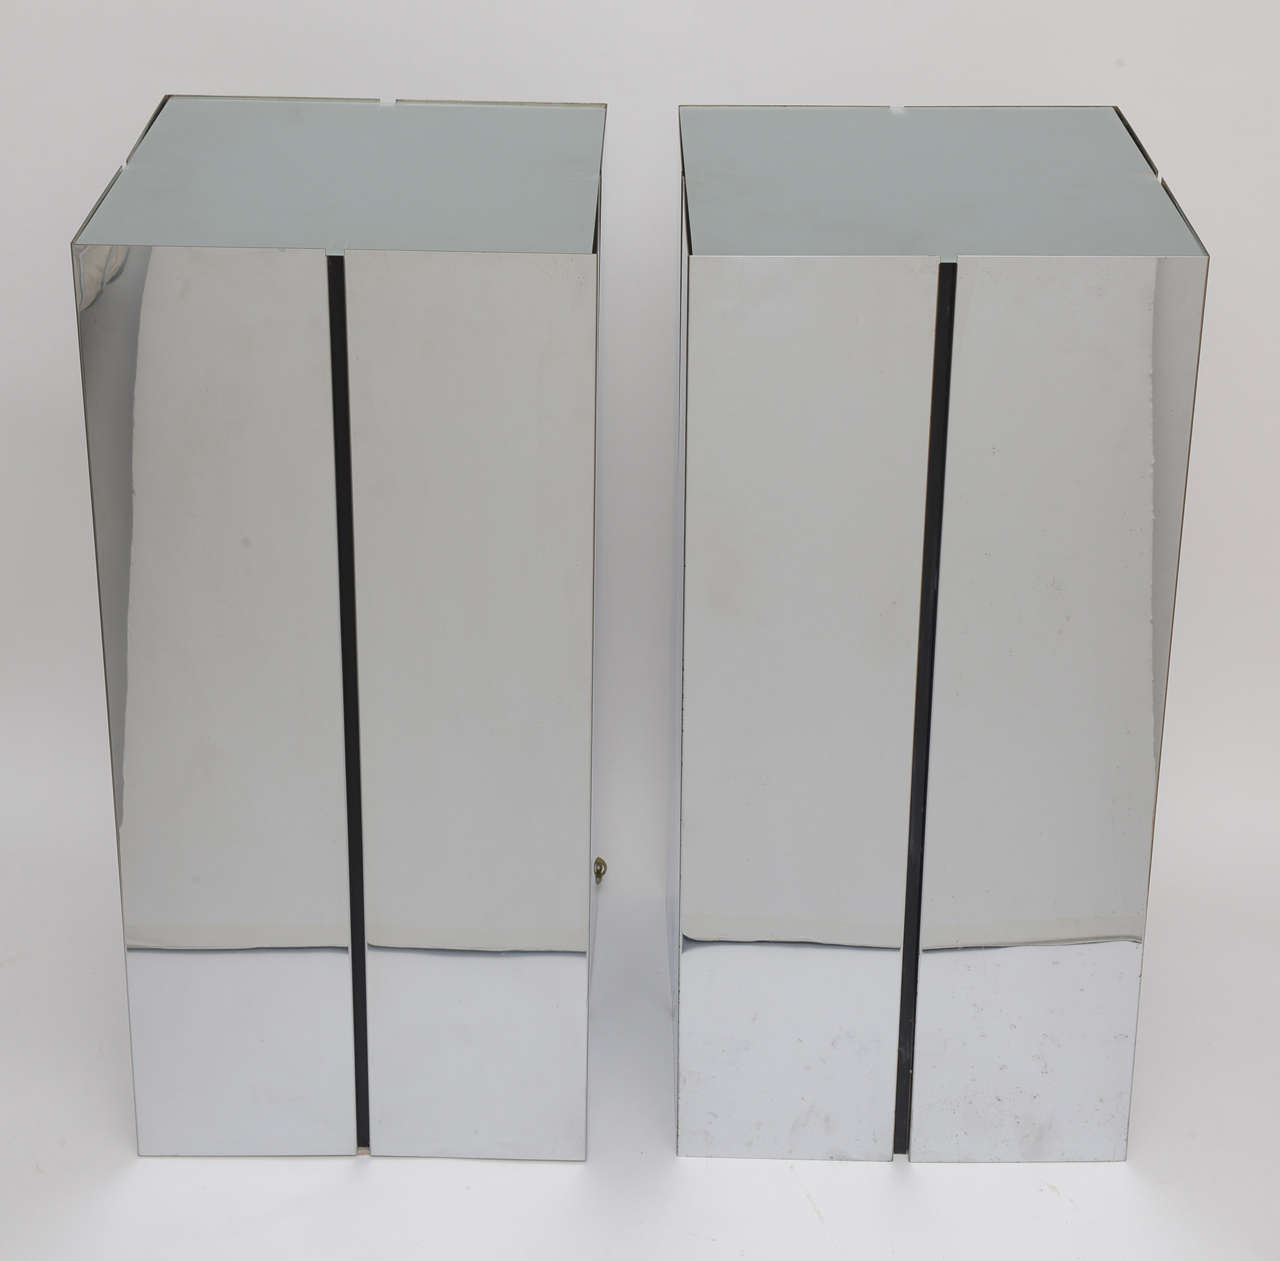 Pair of chromed steel illuminated pedestals with frosted glass tops designed by Neal Small for George Kovacs.

Note: One of the glass tops has a small chip on the underside, which is right above one of the interior braces. See image #10

Note: